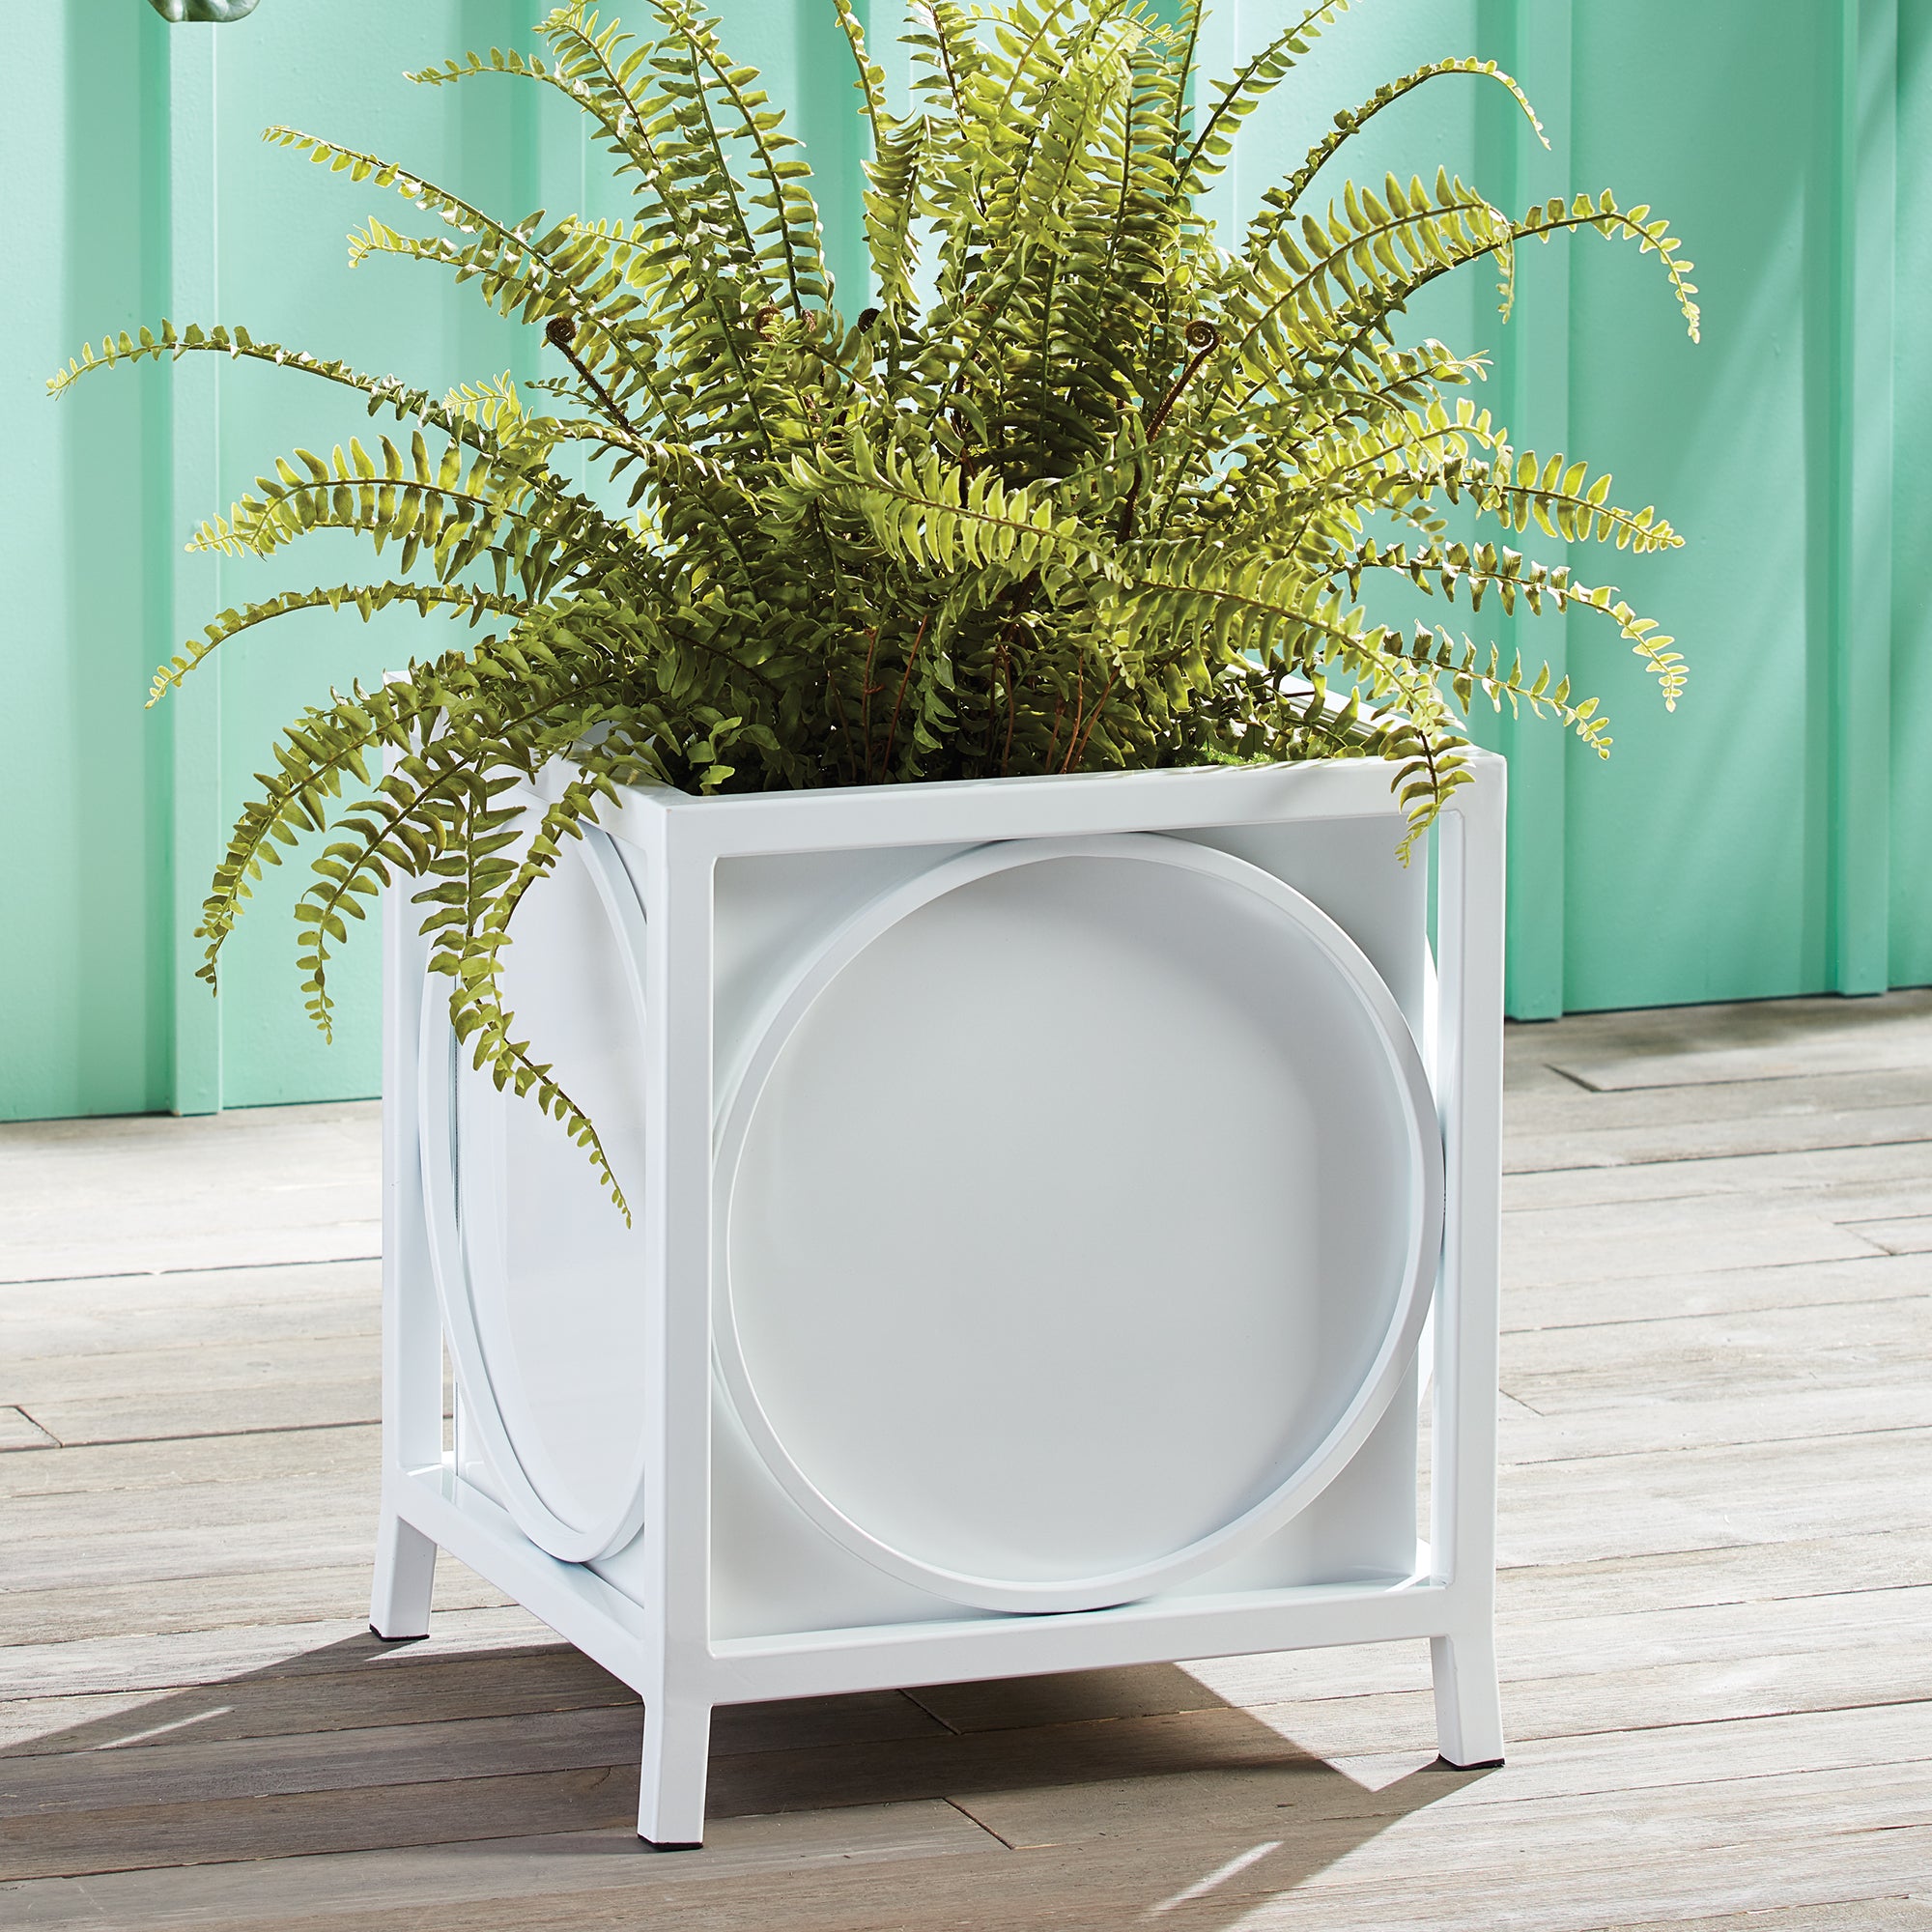 With a traditional profile and sturdy frame, the St. Remy Planter is sure to be an instant classic Powder-coated and safe for the outdoors, It is the perfect pot for driveway, porch or front entry. Amethyst Home provides interior design, new construction, custom furniture, and area rugs in the Scottsdale metro area.